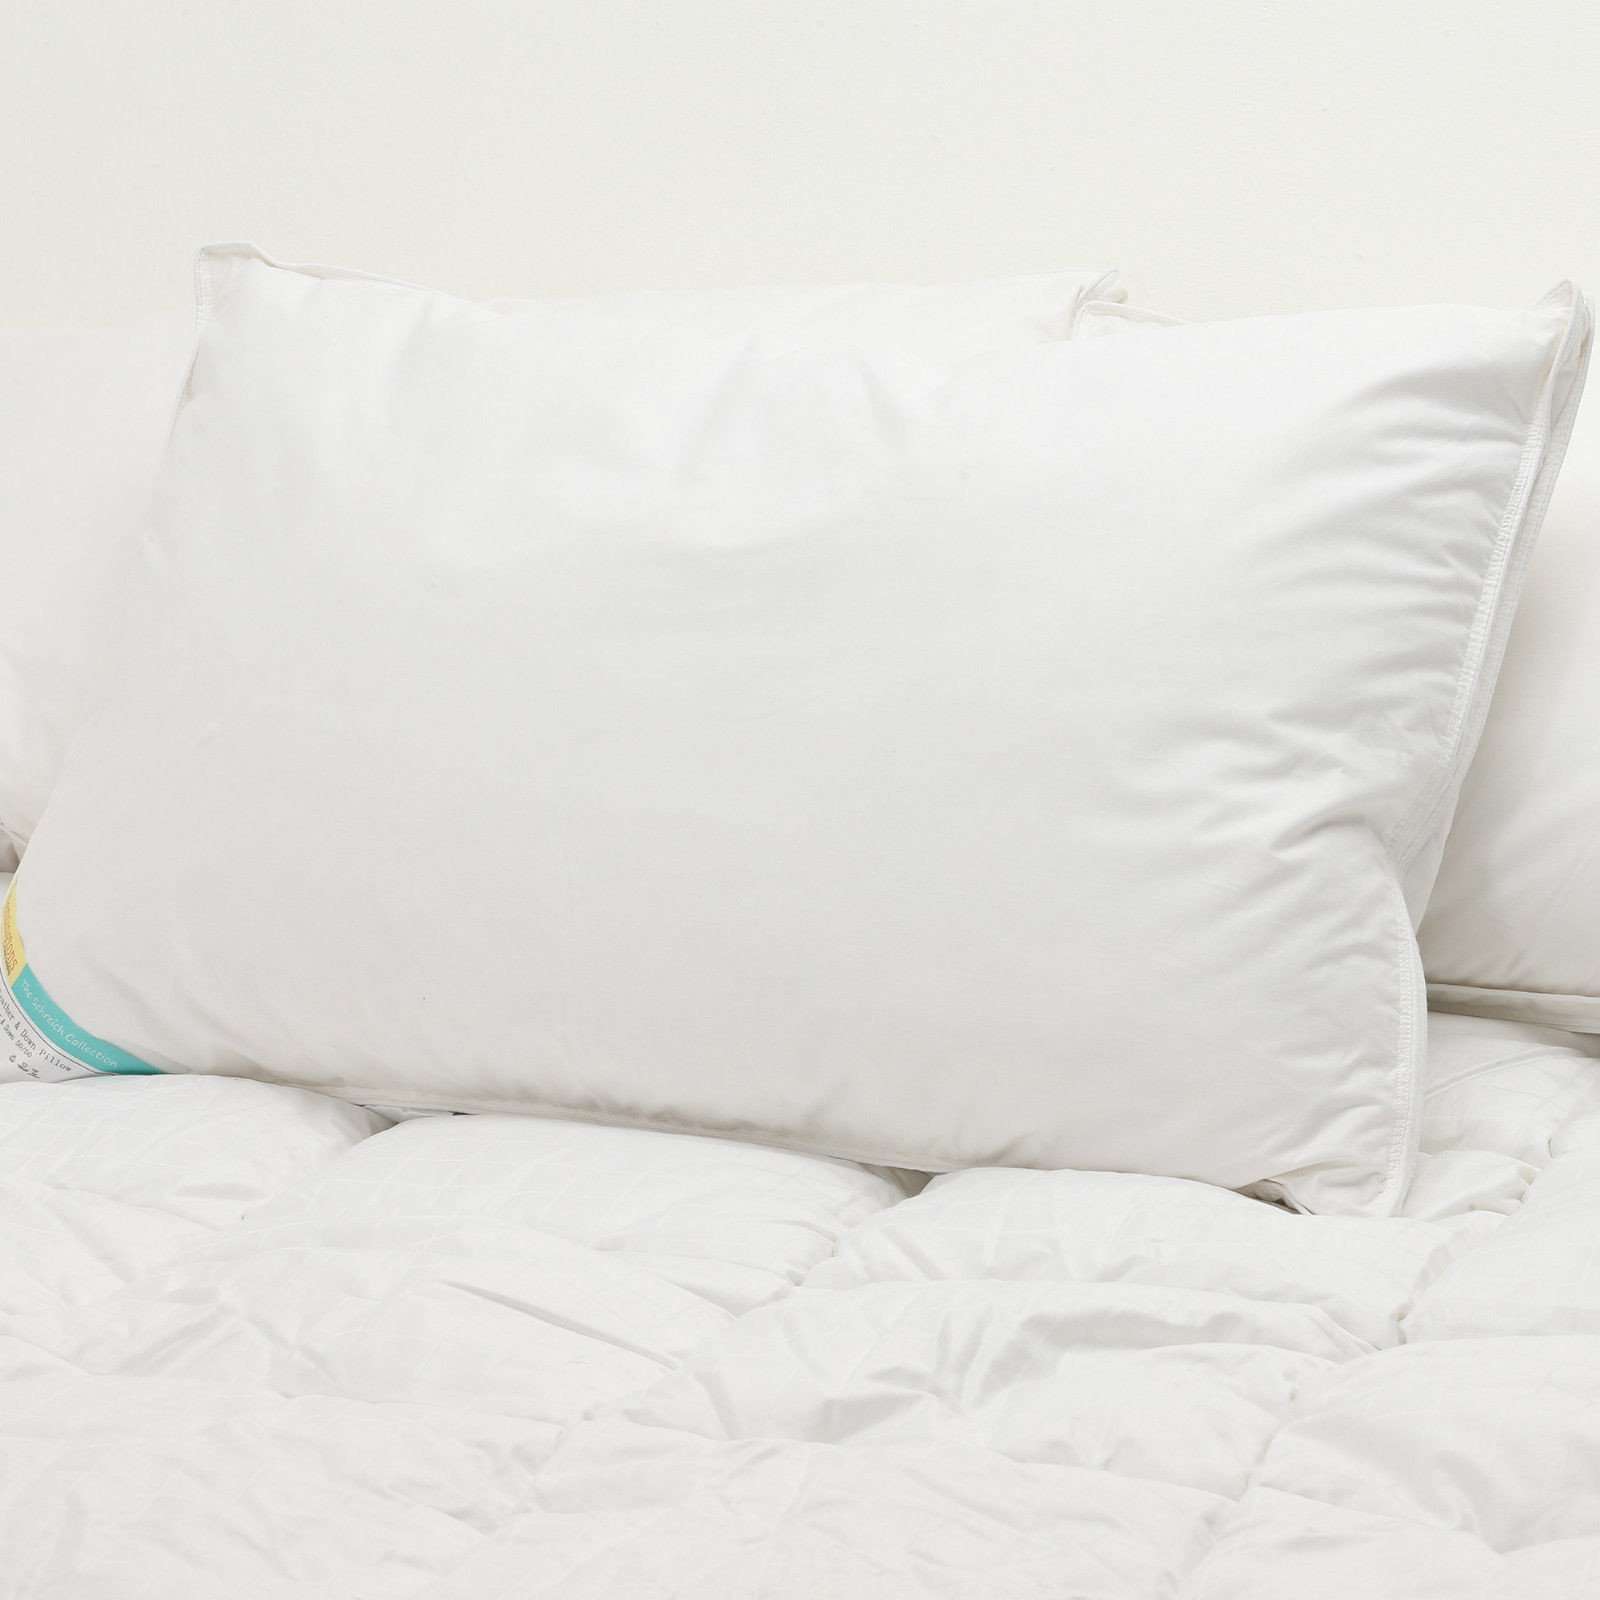 Super-Soft-Elegant-White-Goose-Feather-&-Down-Pillows-for-Your-Bed